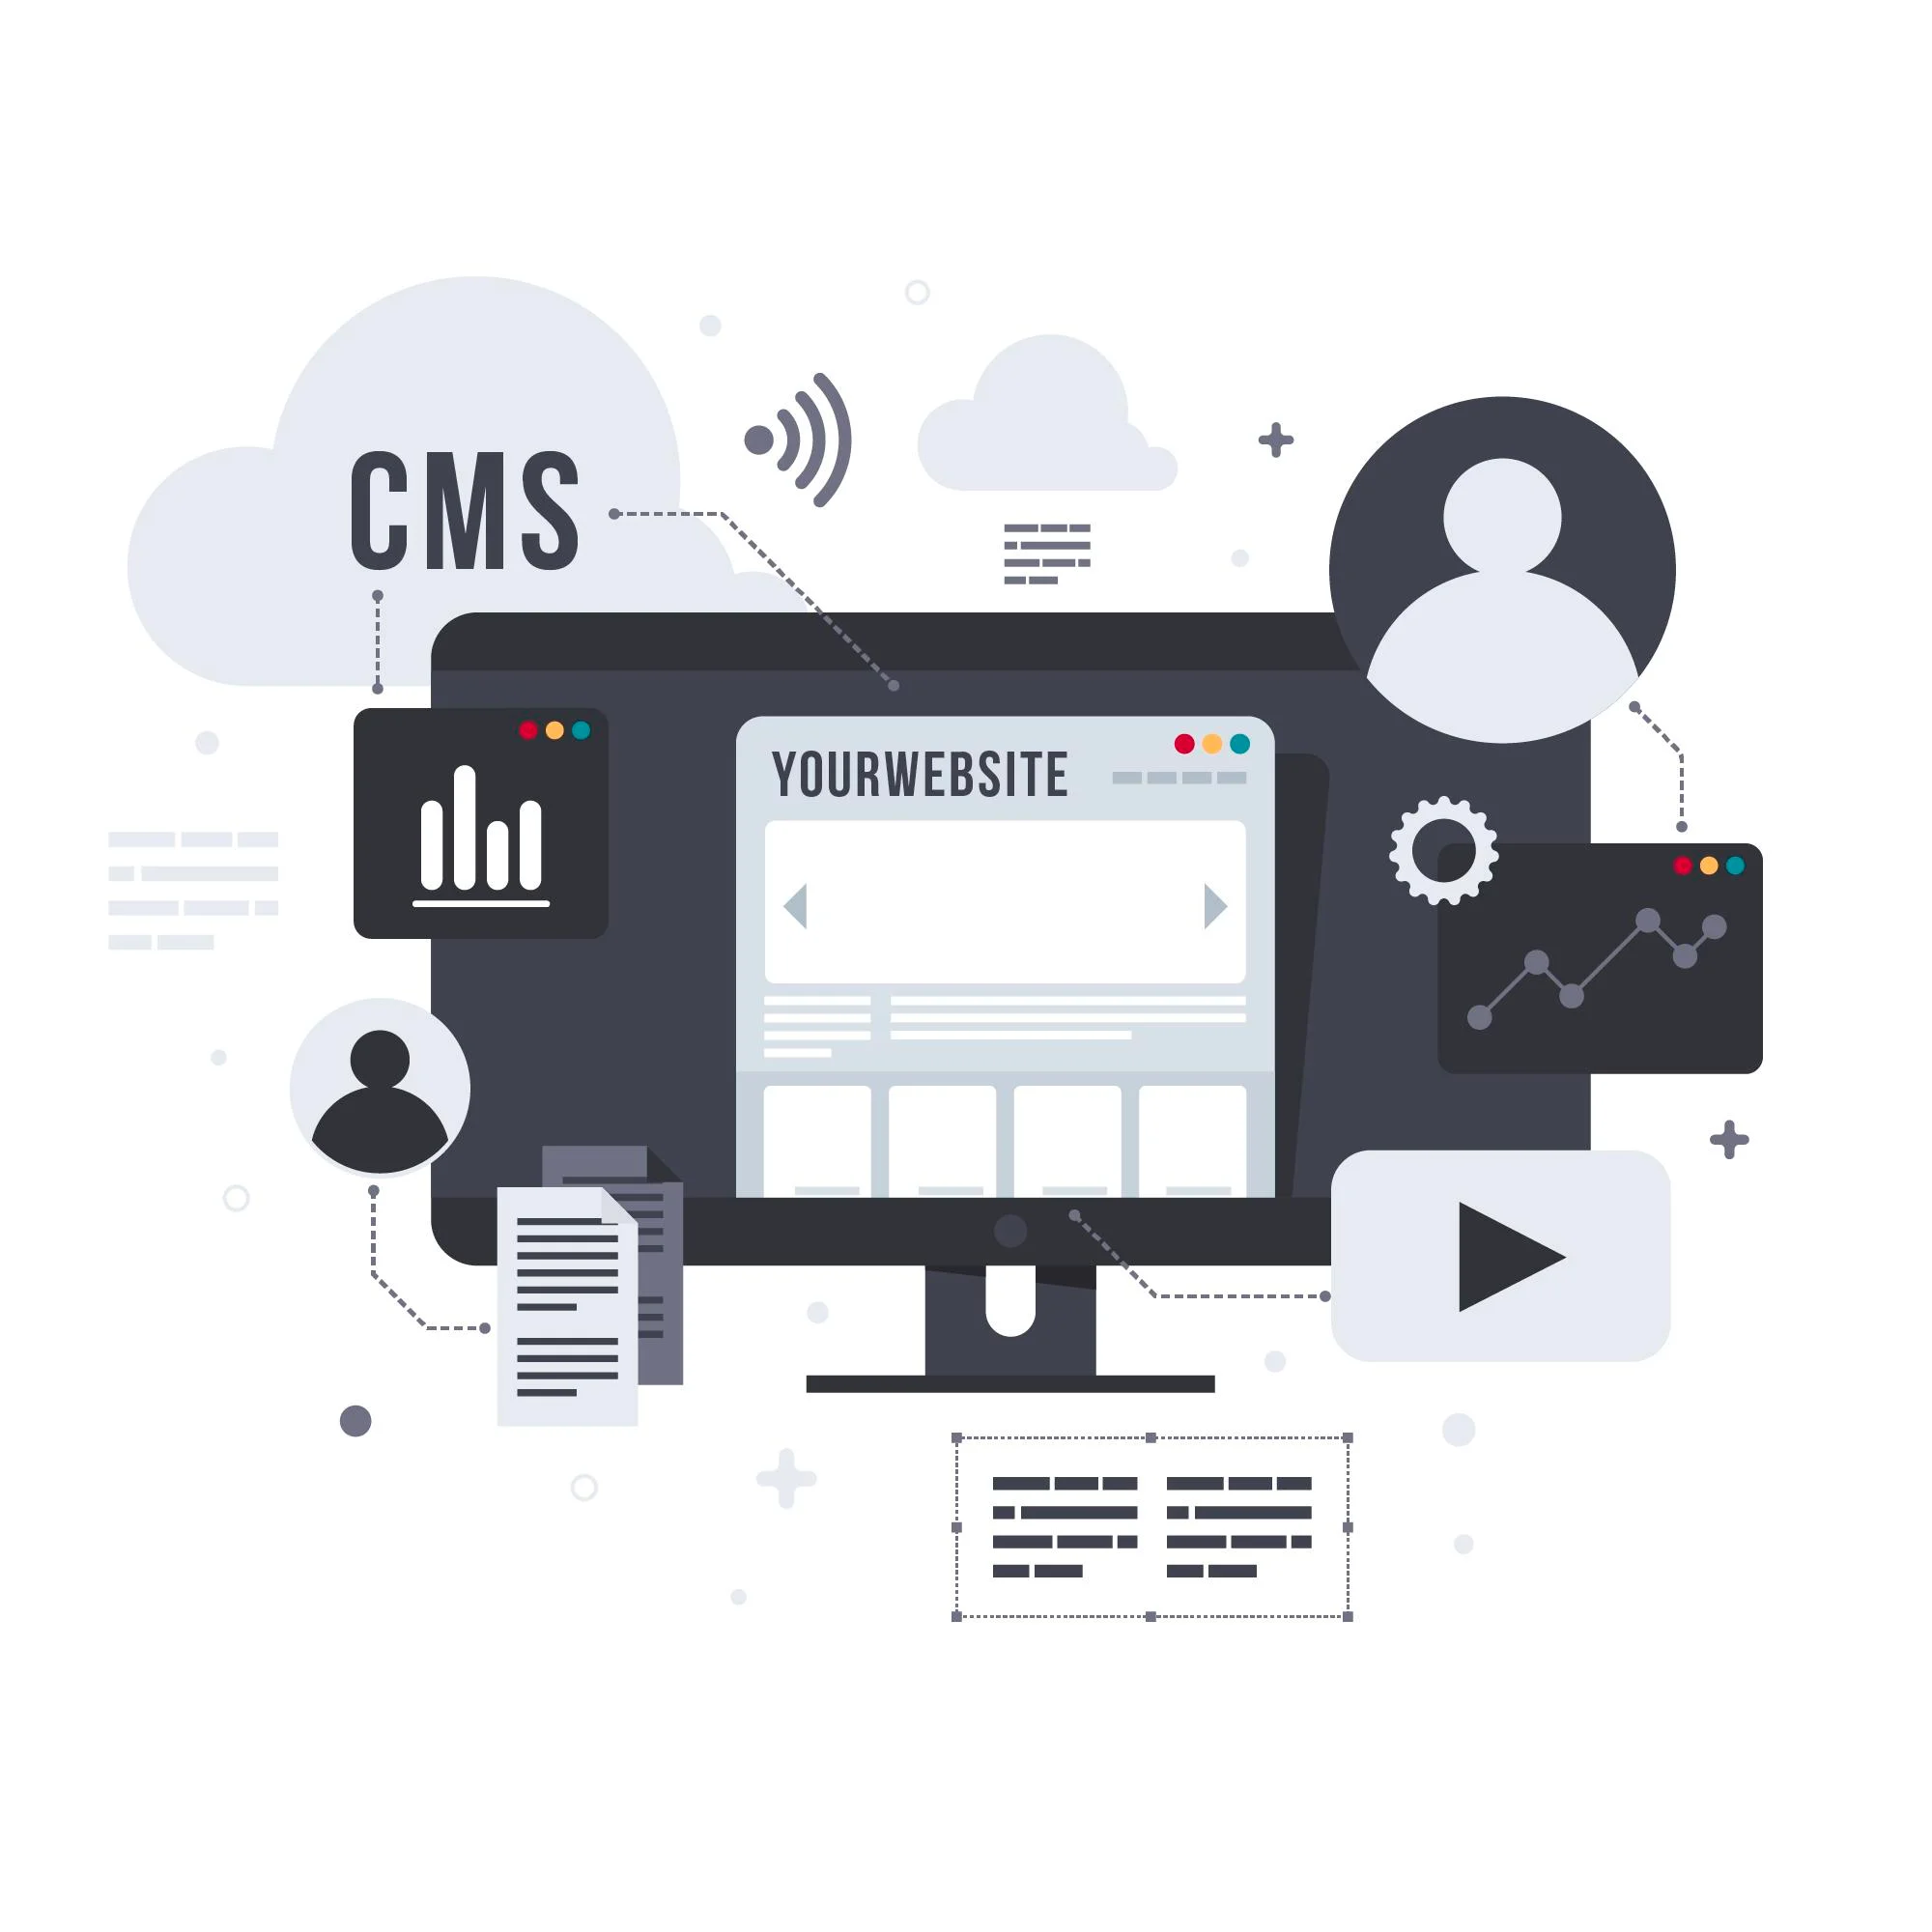 An illustration showing CMS website being developed on a monitor along with some website elements floating by